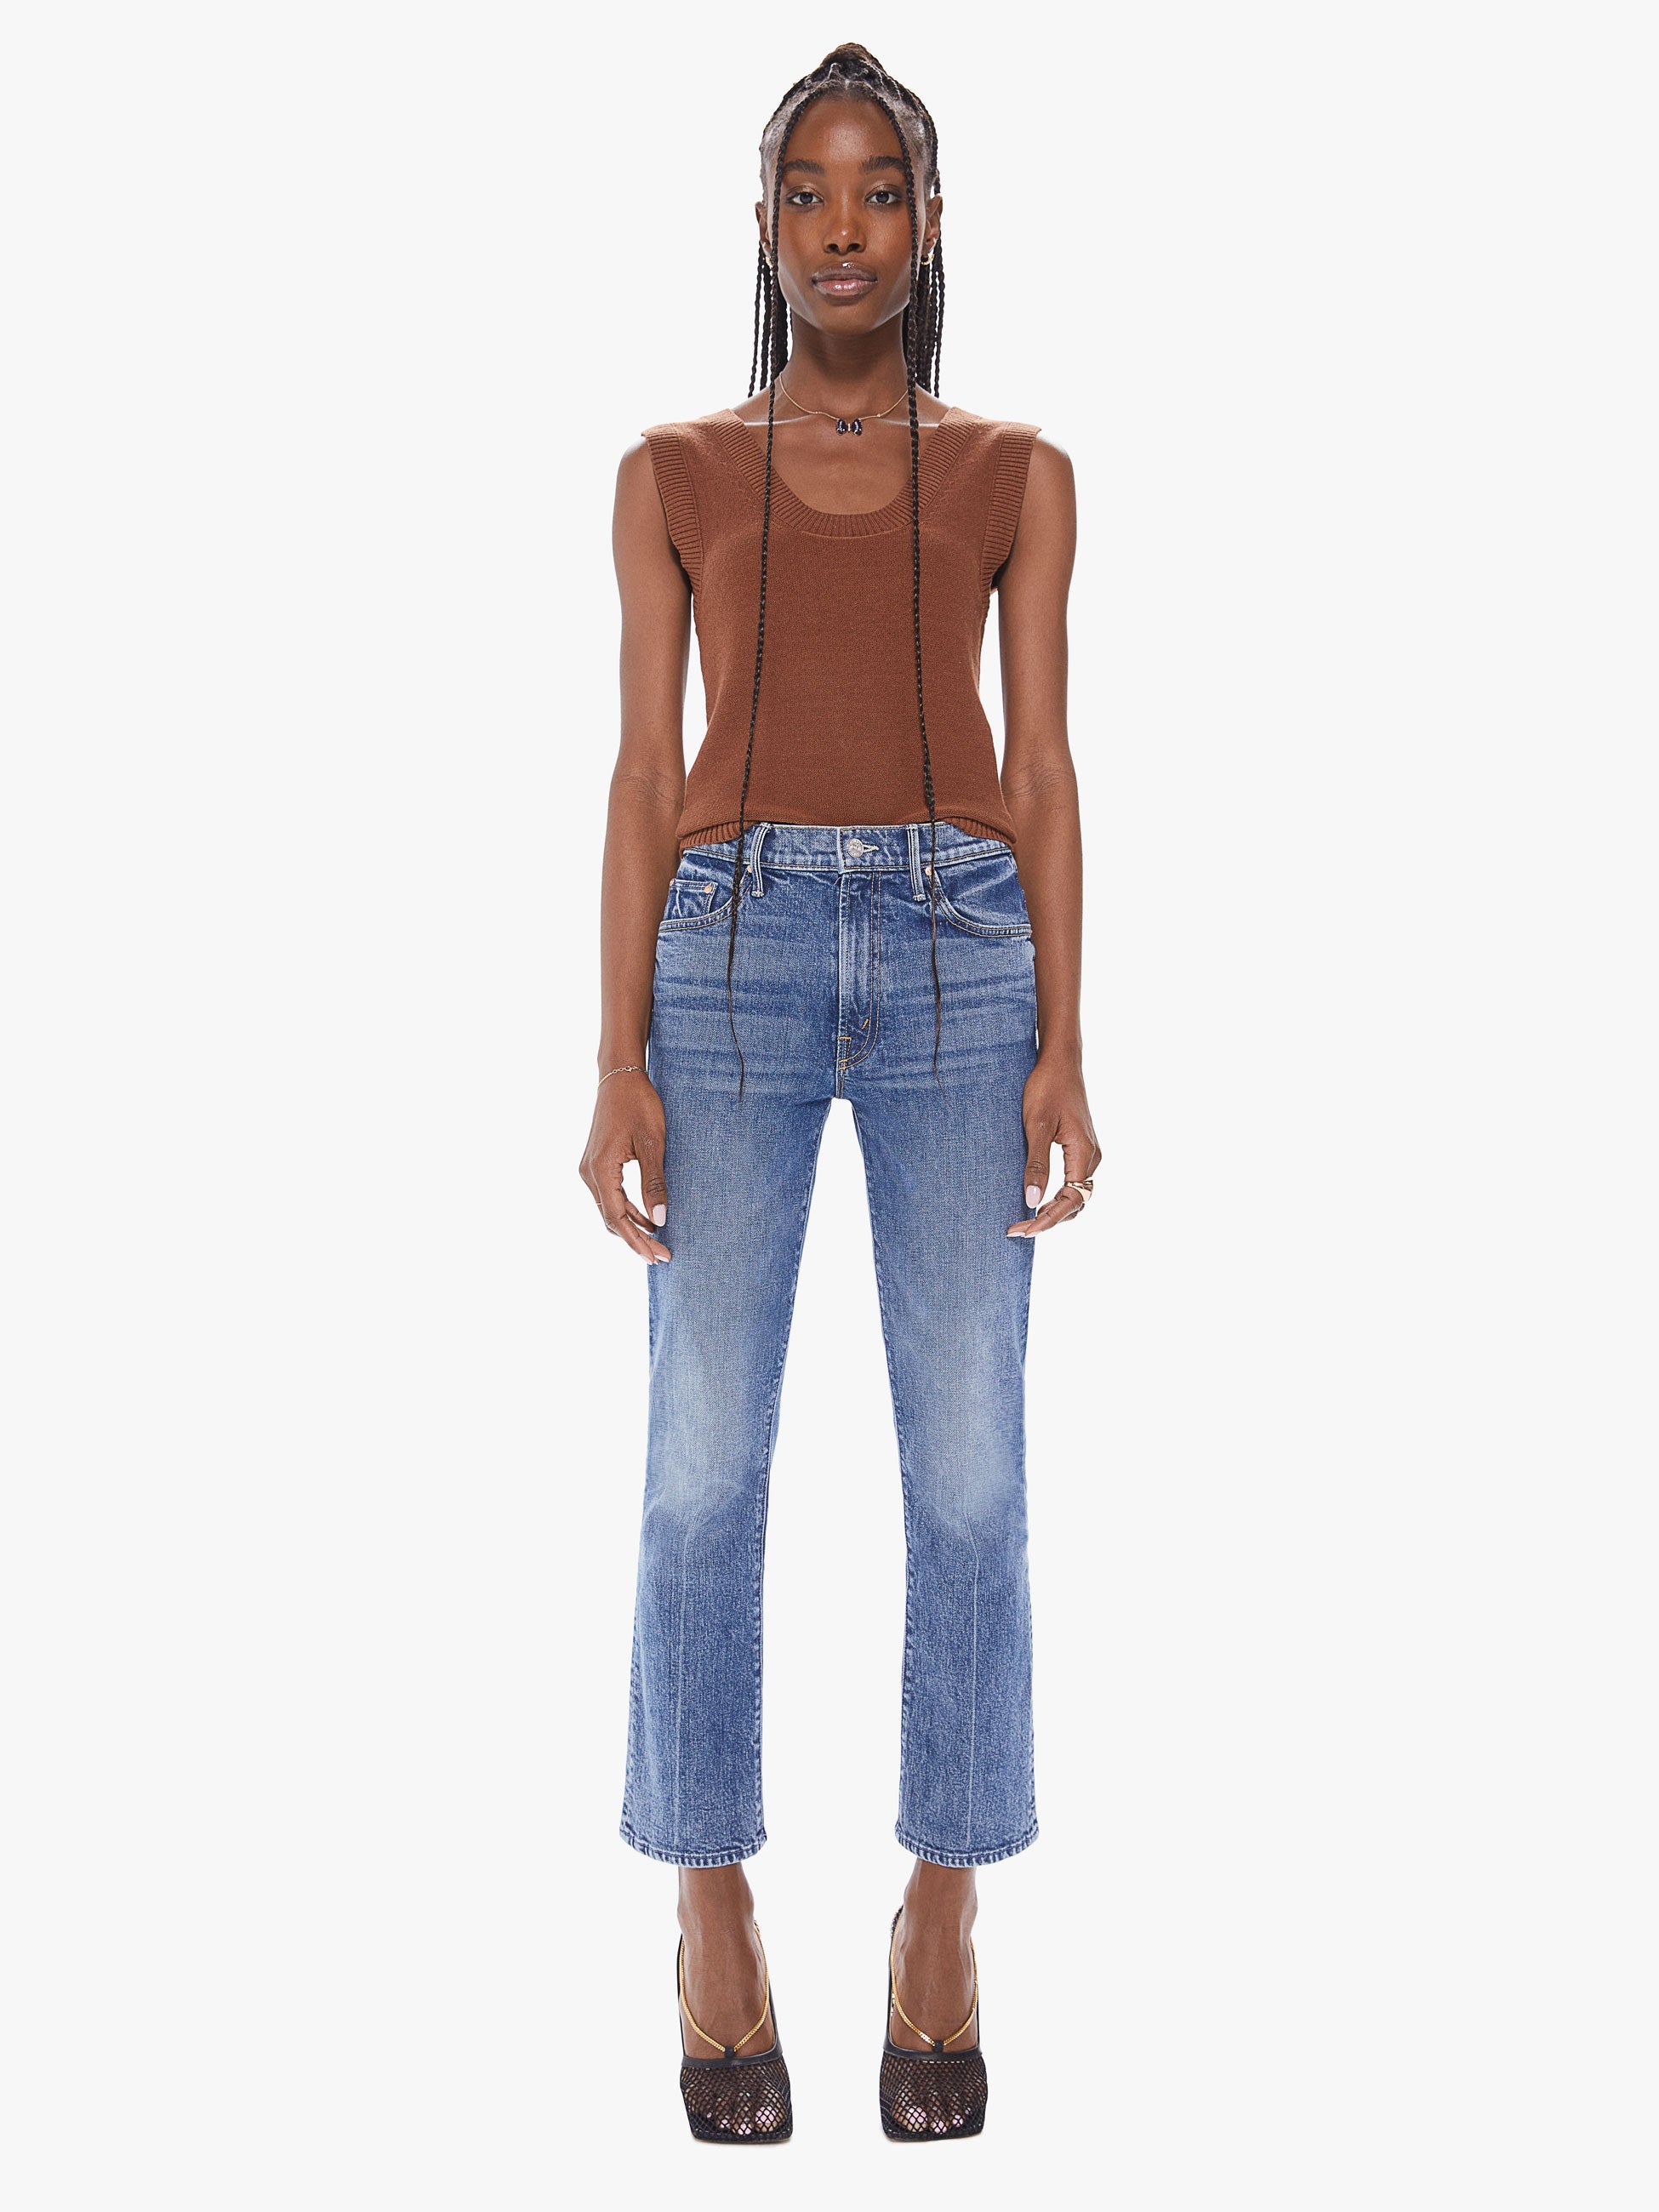 Tripping out. This iconic high-waisted bootcut is cropped at the ankle with a clean hem. Cut from semi-rigid SUPERIOR denim, Destination Unknown is a mid-blue wash with whiskering and fading throughout. Not lost, just wandering.